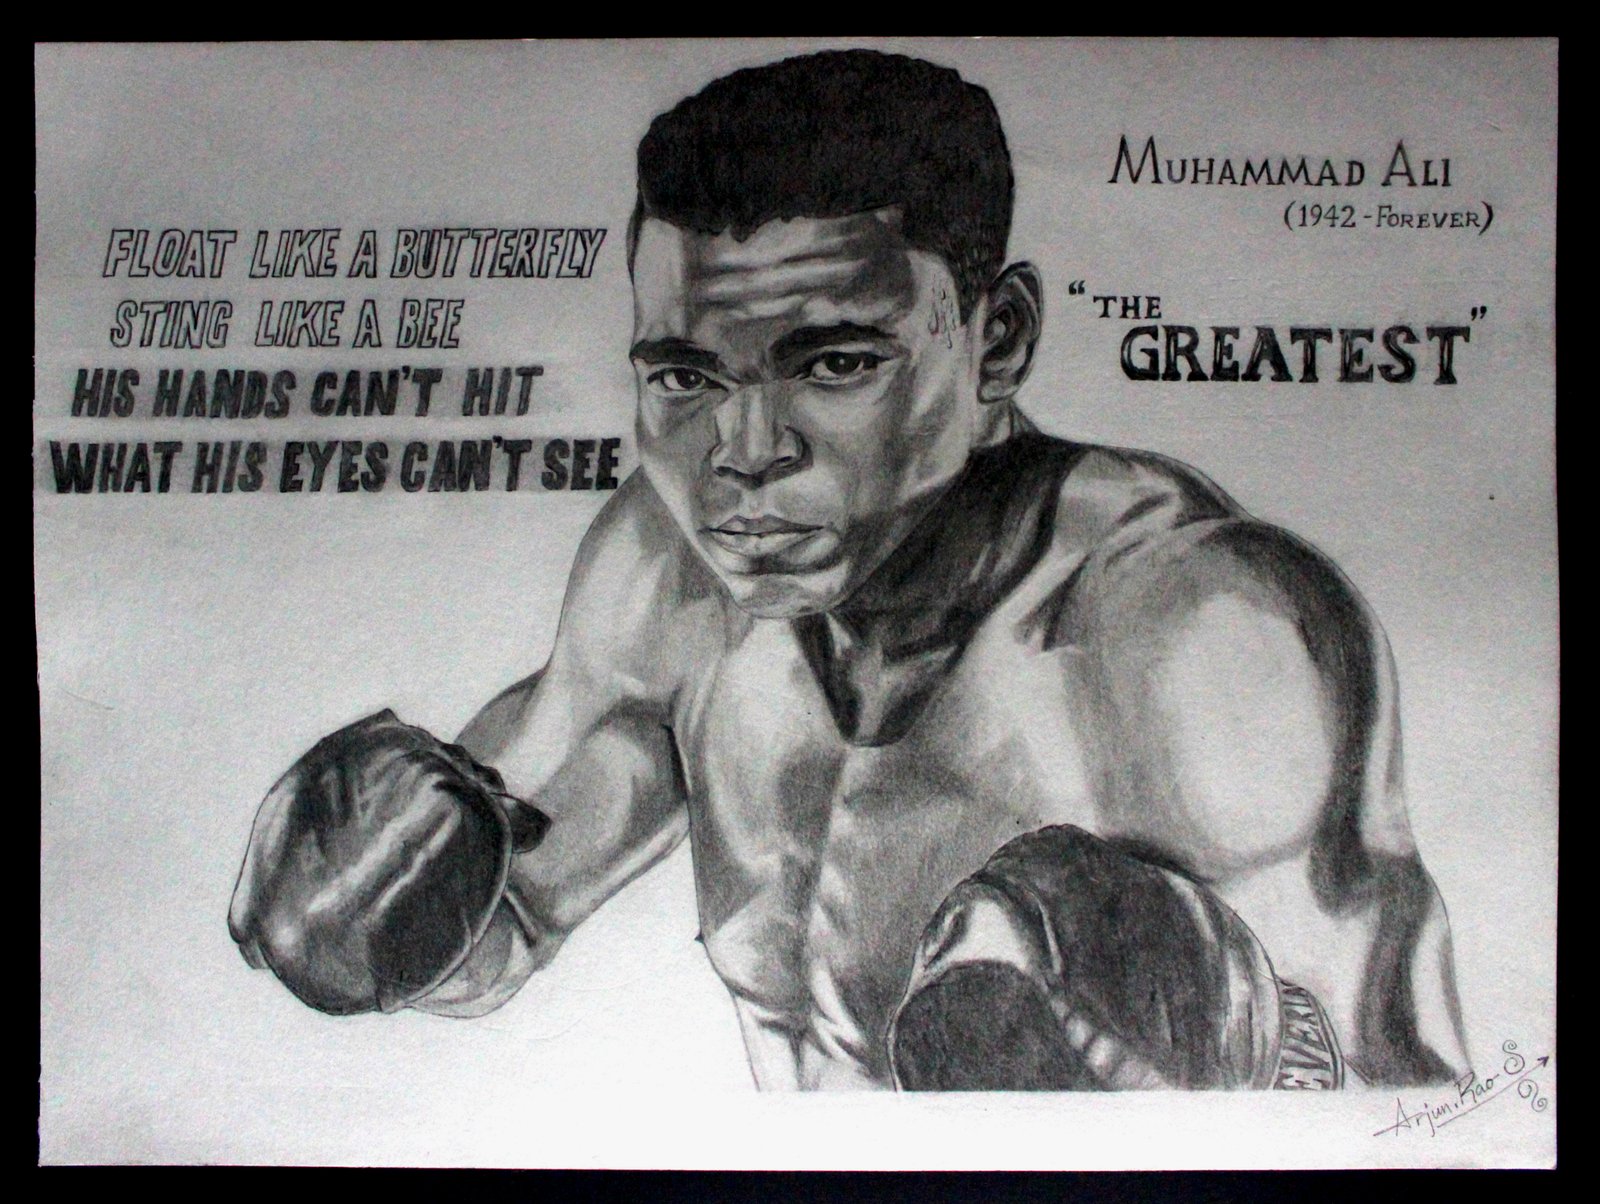 “The Greatest”.